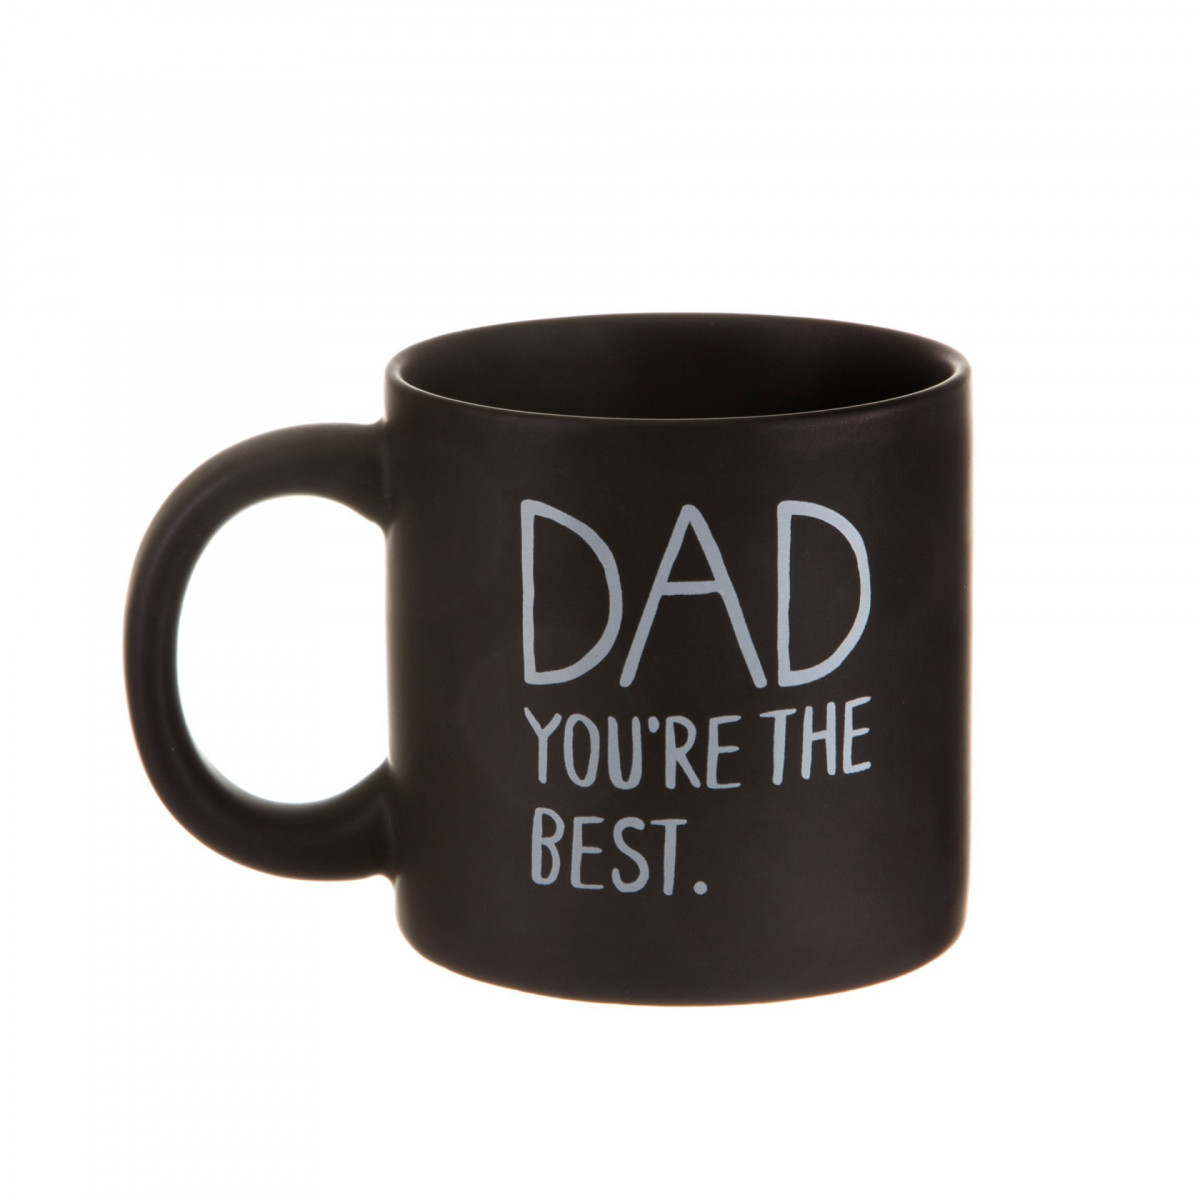 Mug "dad your are the best  "